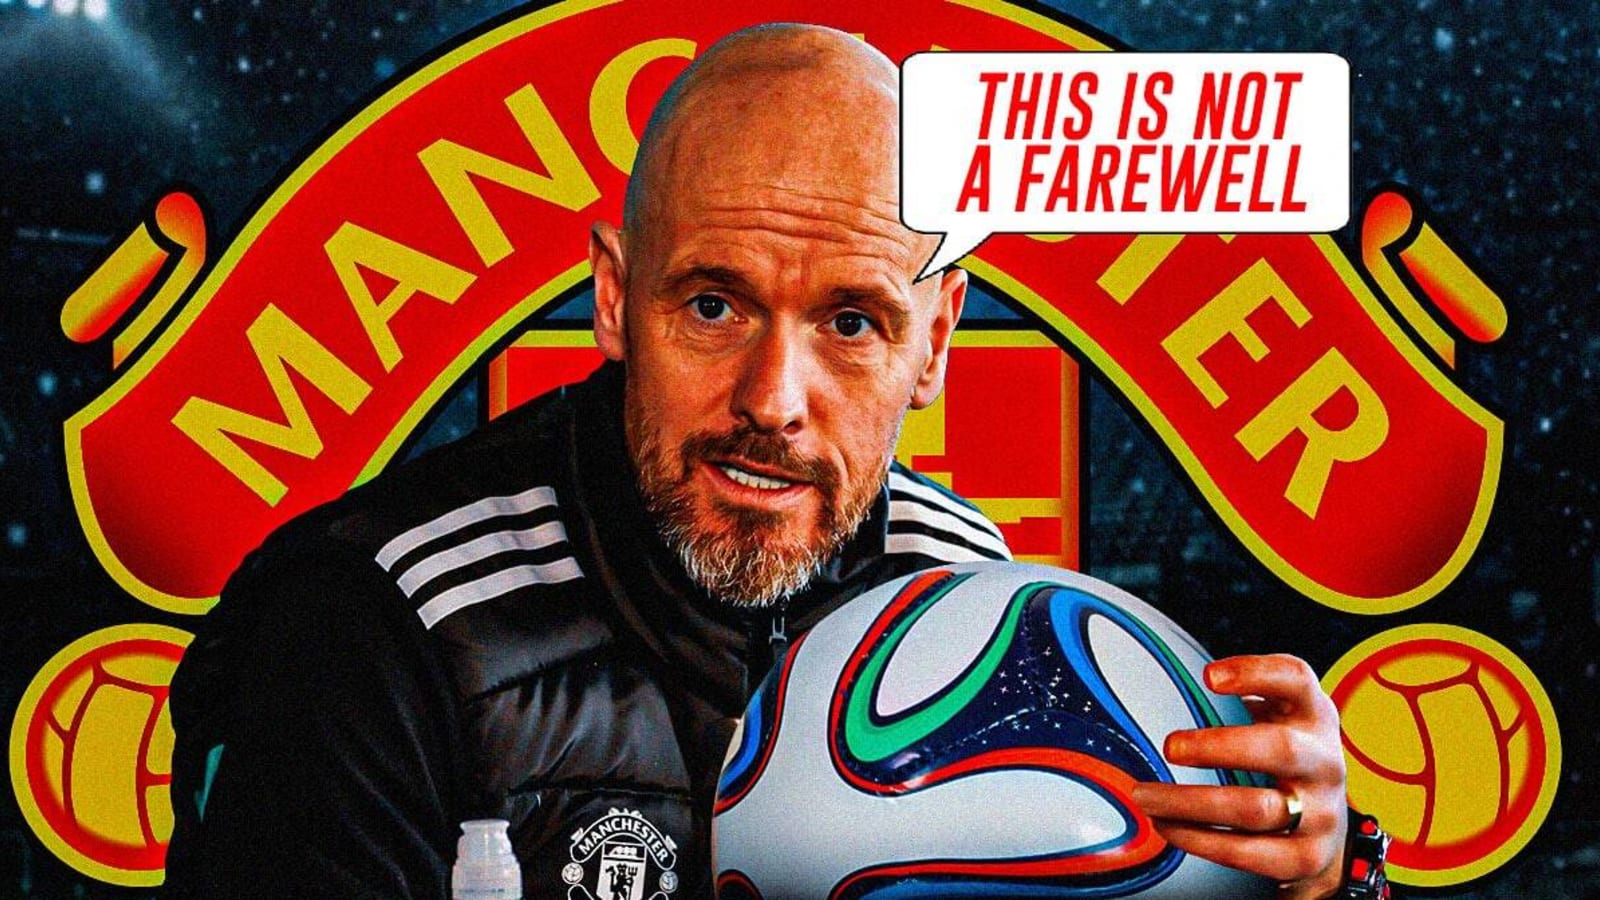 Erik ten Hag confirms Manchester United’s lap of honor after Newcastle game